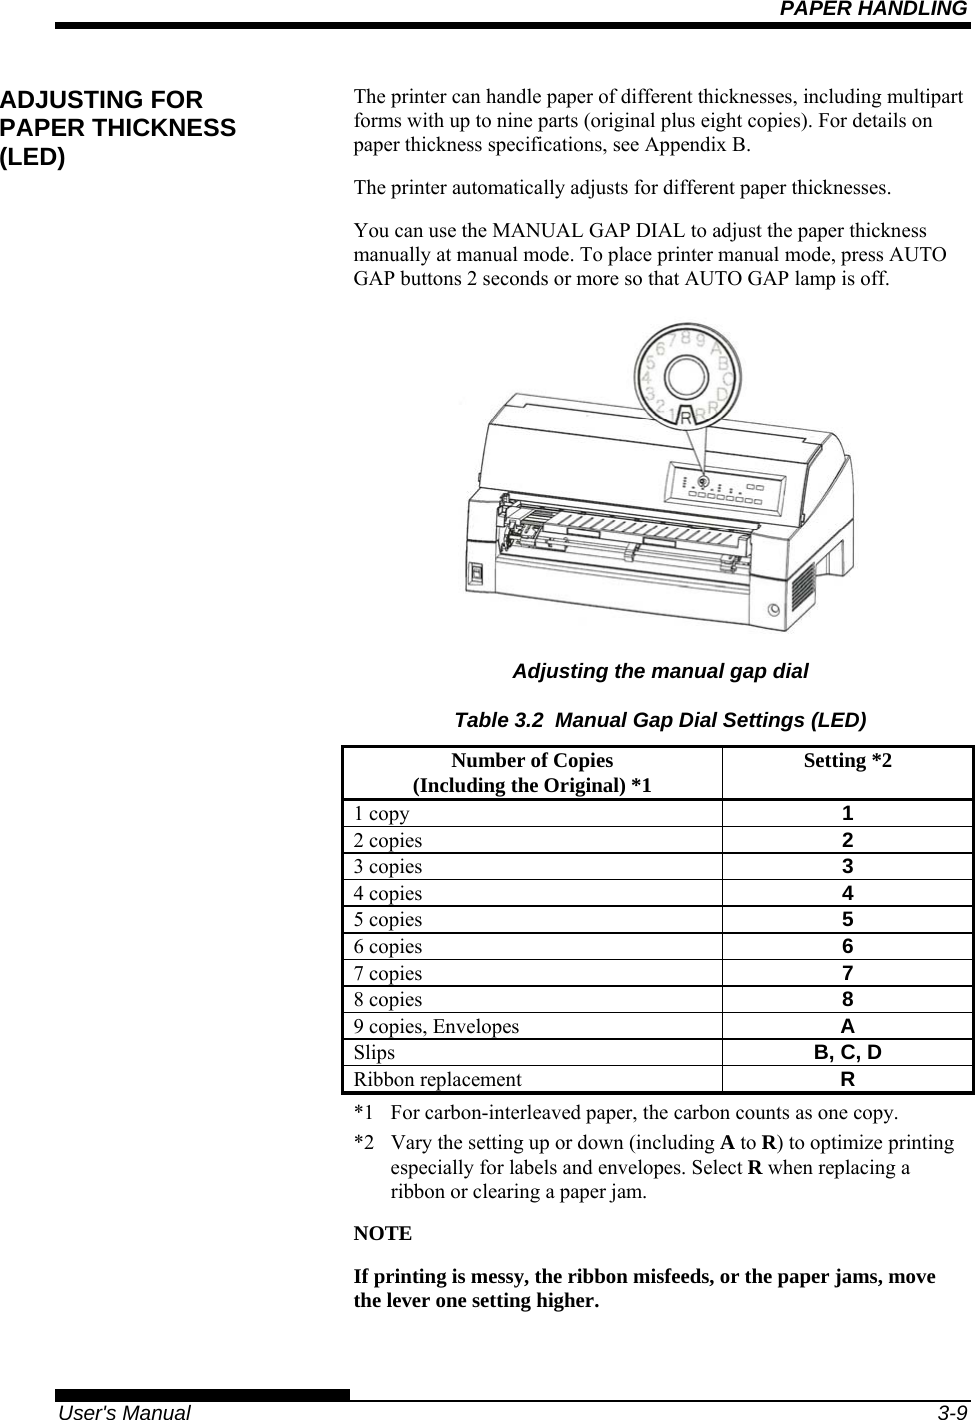 PAPER HANDLING   User&apos;s Manual  3-9 The printer can handle paper of different thicknesses, including multipart forms with up to nine parts (original plus eight copies). For details on paper thickness specifications, see Appendix B. The printer automatically adjusts for different paper thicknesses. You can use the MANUAL GAP DIAL to adjust the paper thickness manually at manual mode. To place printer manual mode, press AUTO GAP buttons 2 seconds or more so that AUTO GAP lamp is off.  Adjusting the manual gap dial Table 3.2  Manual Gap Dial Settings (LED) Number of Copies  (Including the Original) *1  Setting *2 1 copy   1 2 copies   2 3 copies   3 4 copies   4 5 copies   5 6 copies   6 7 copies   7 8 copies   8 9 copies, Envelopes  A Slips  B, C, D Ribbon replacement  R *1 For carbon-interleaved paper, the carbon counts as one copy. *2  Vary the setting up or down (including A to R) to optimize printing especially for labels and envelopes. Select R when replacing a ribbon or clearing a paper jam. NOTE If printing is messy, the ribbon misfeeds, or the paper jams, move the lever one setting higher.  ADJUSTING FOR PAPER THICKNESS (LED) 